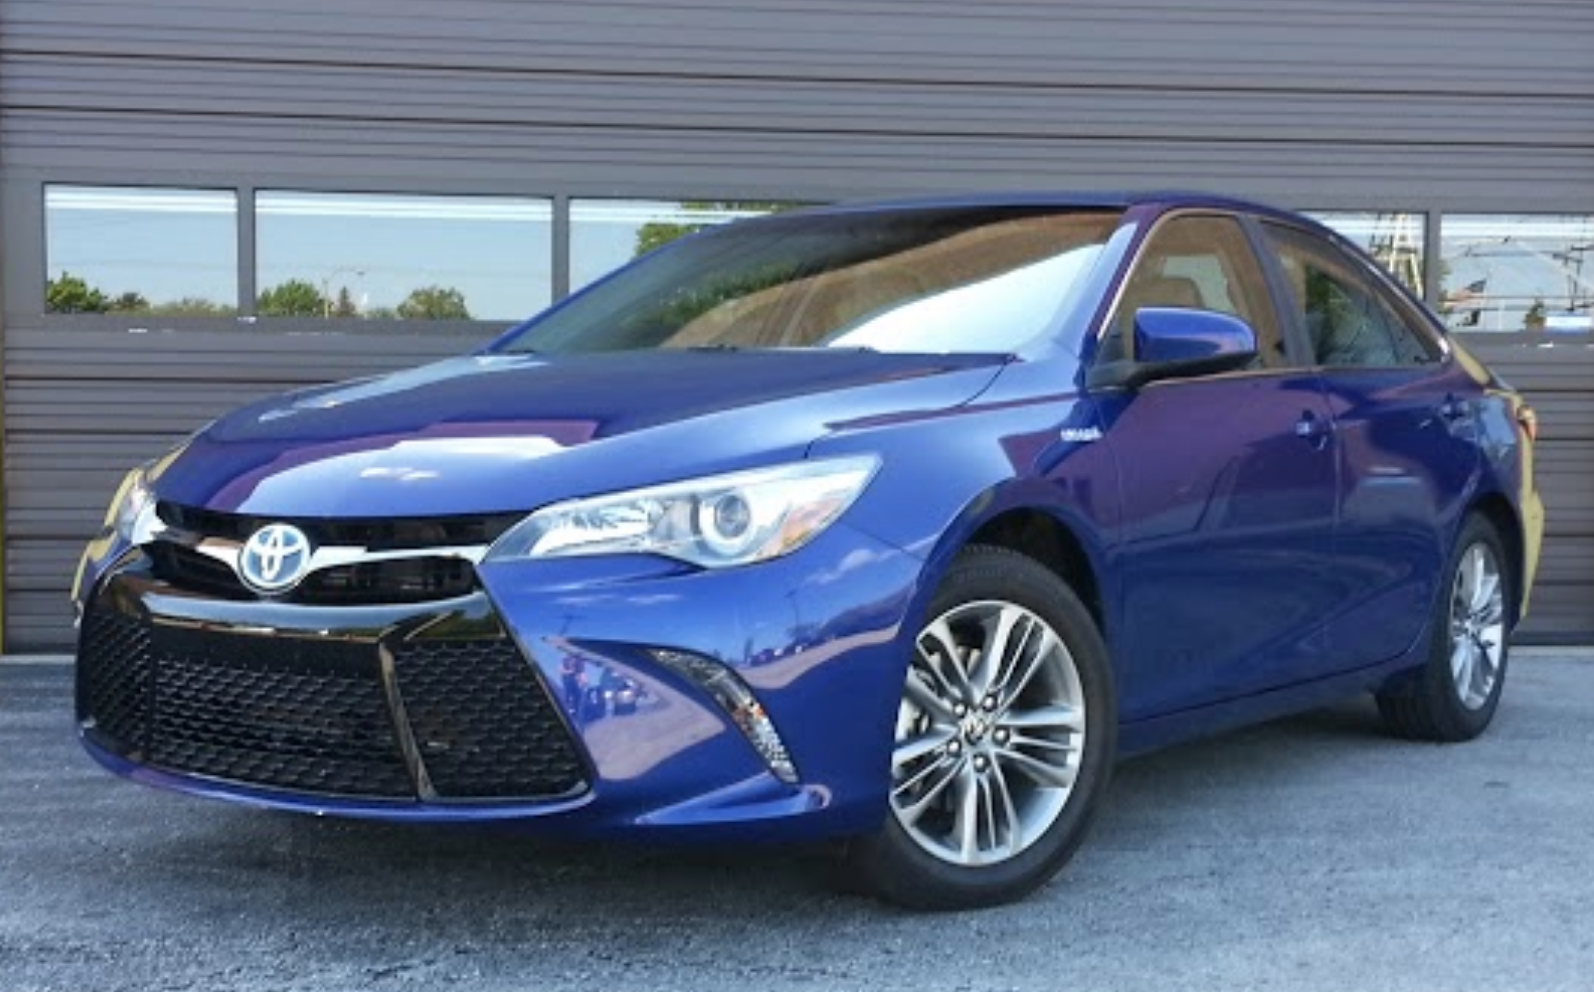 Test Drive: 2015 Toyota Camry Hybrid SE - The Daily Drive - Consumer ...